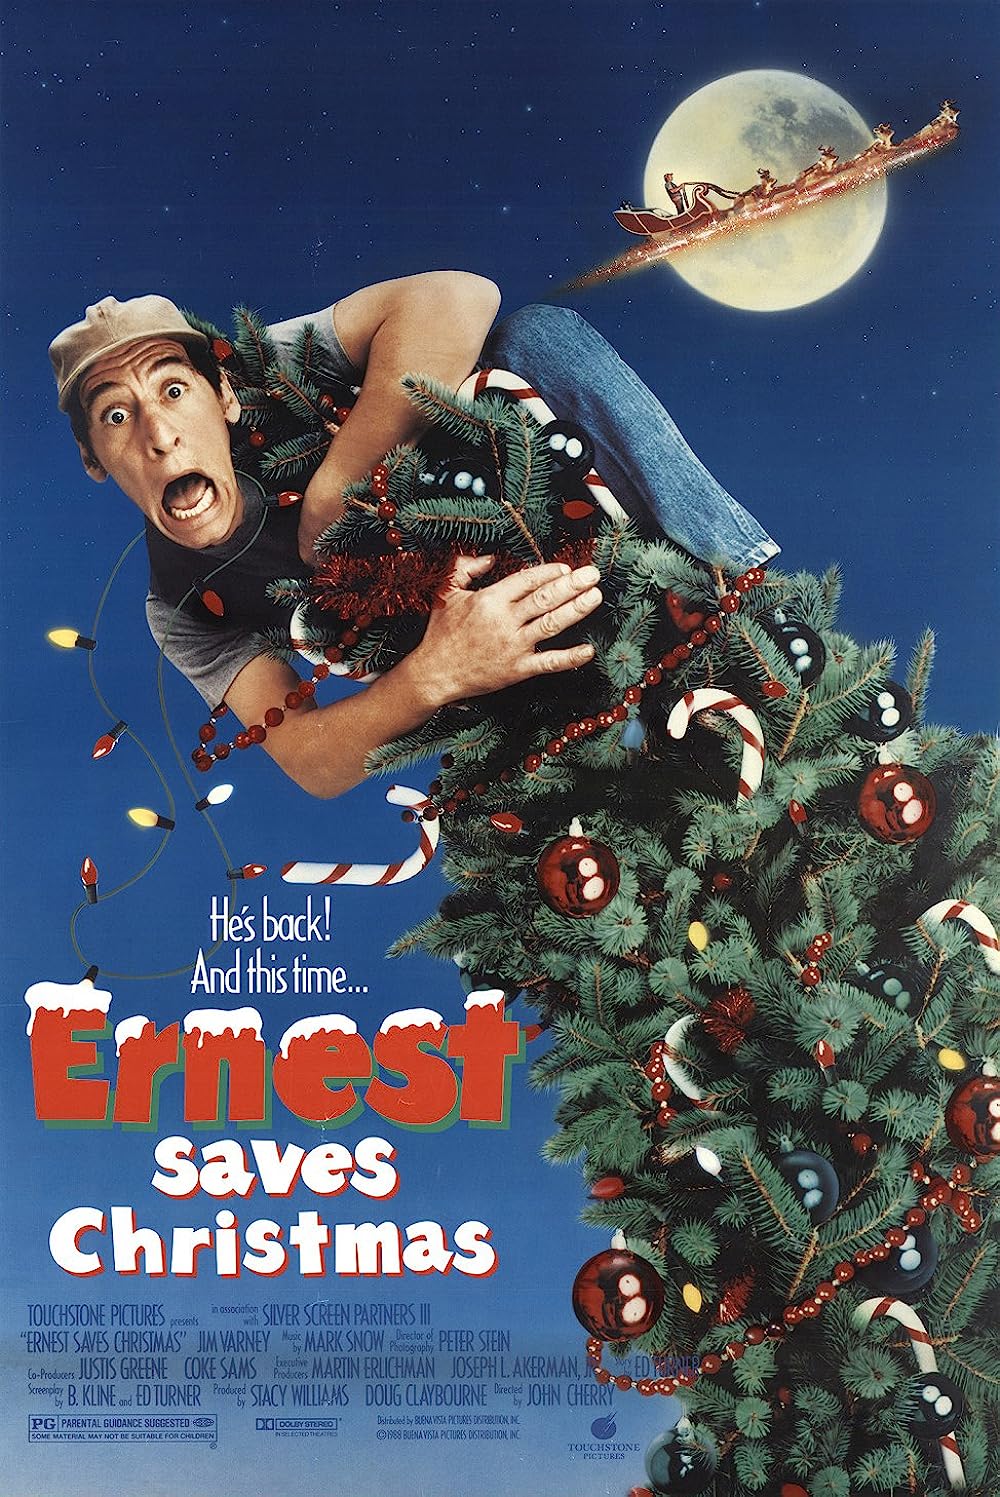 best funniest christmas movies - Ernest Saves Christmas